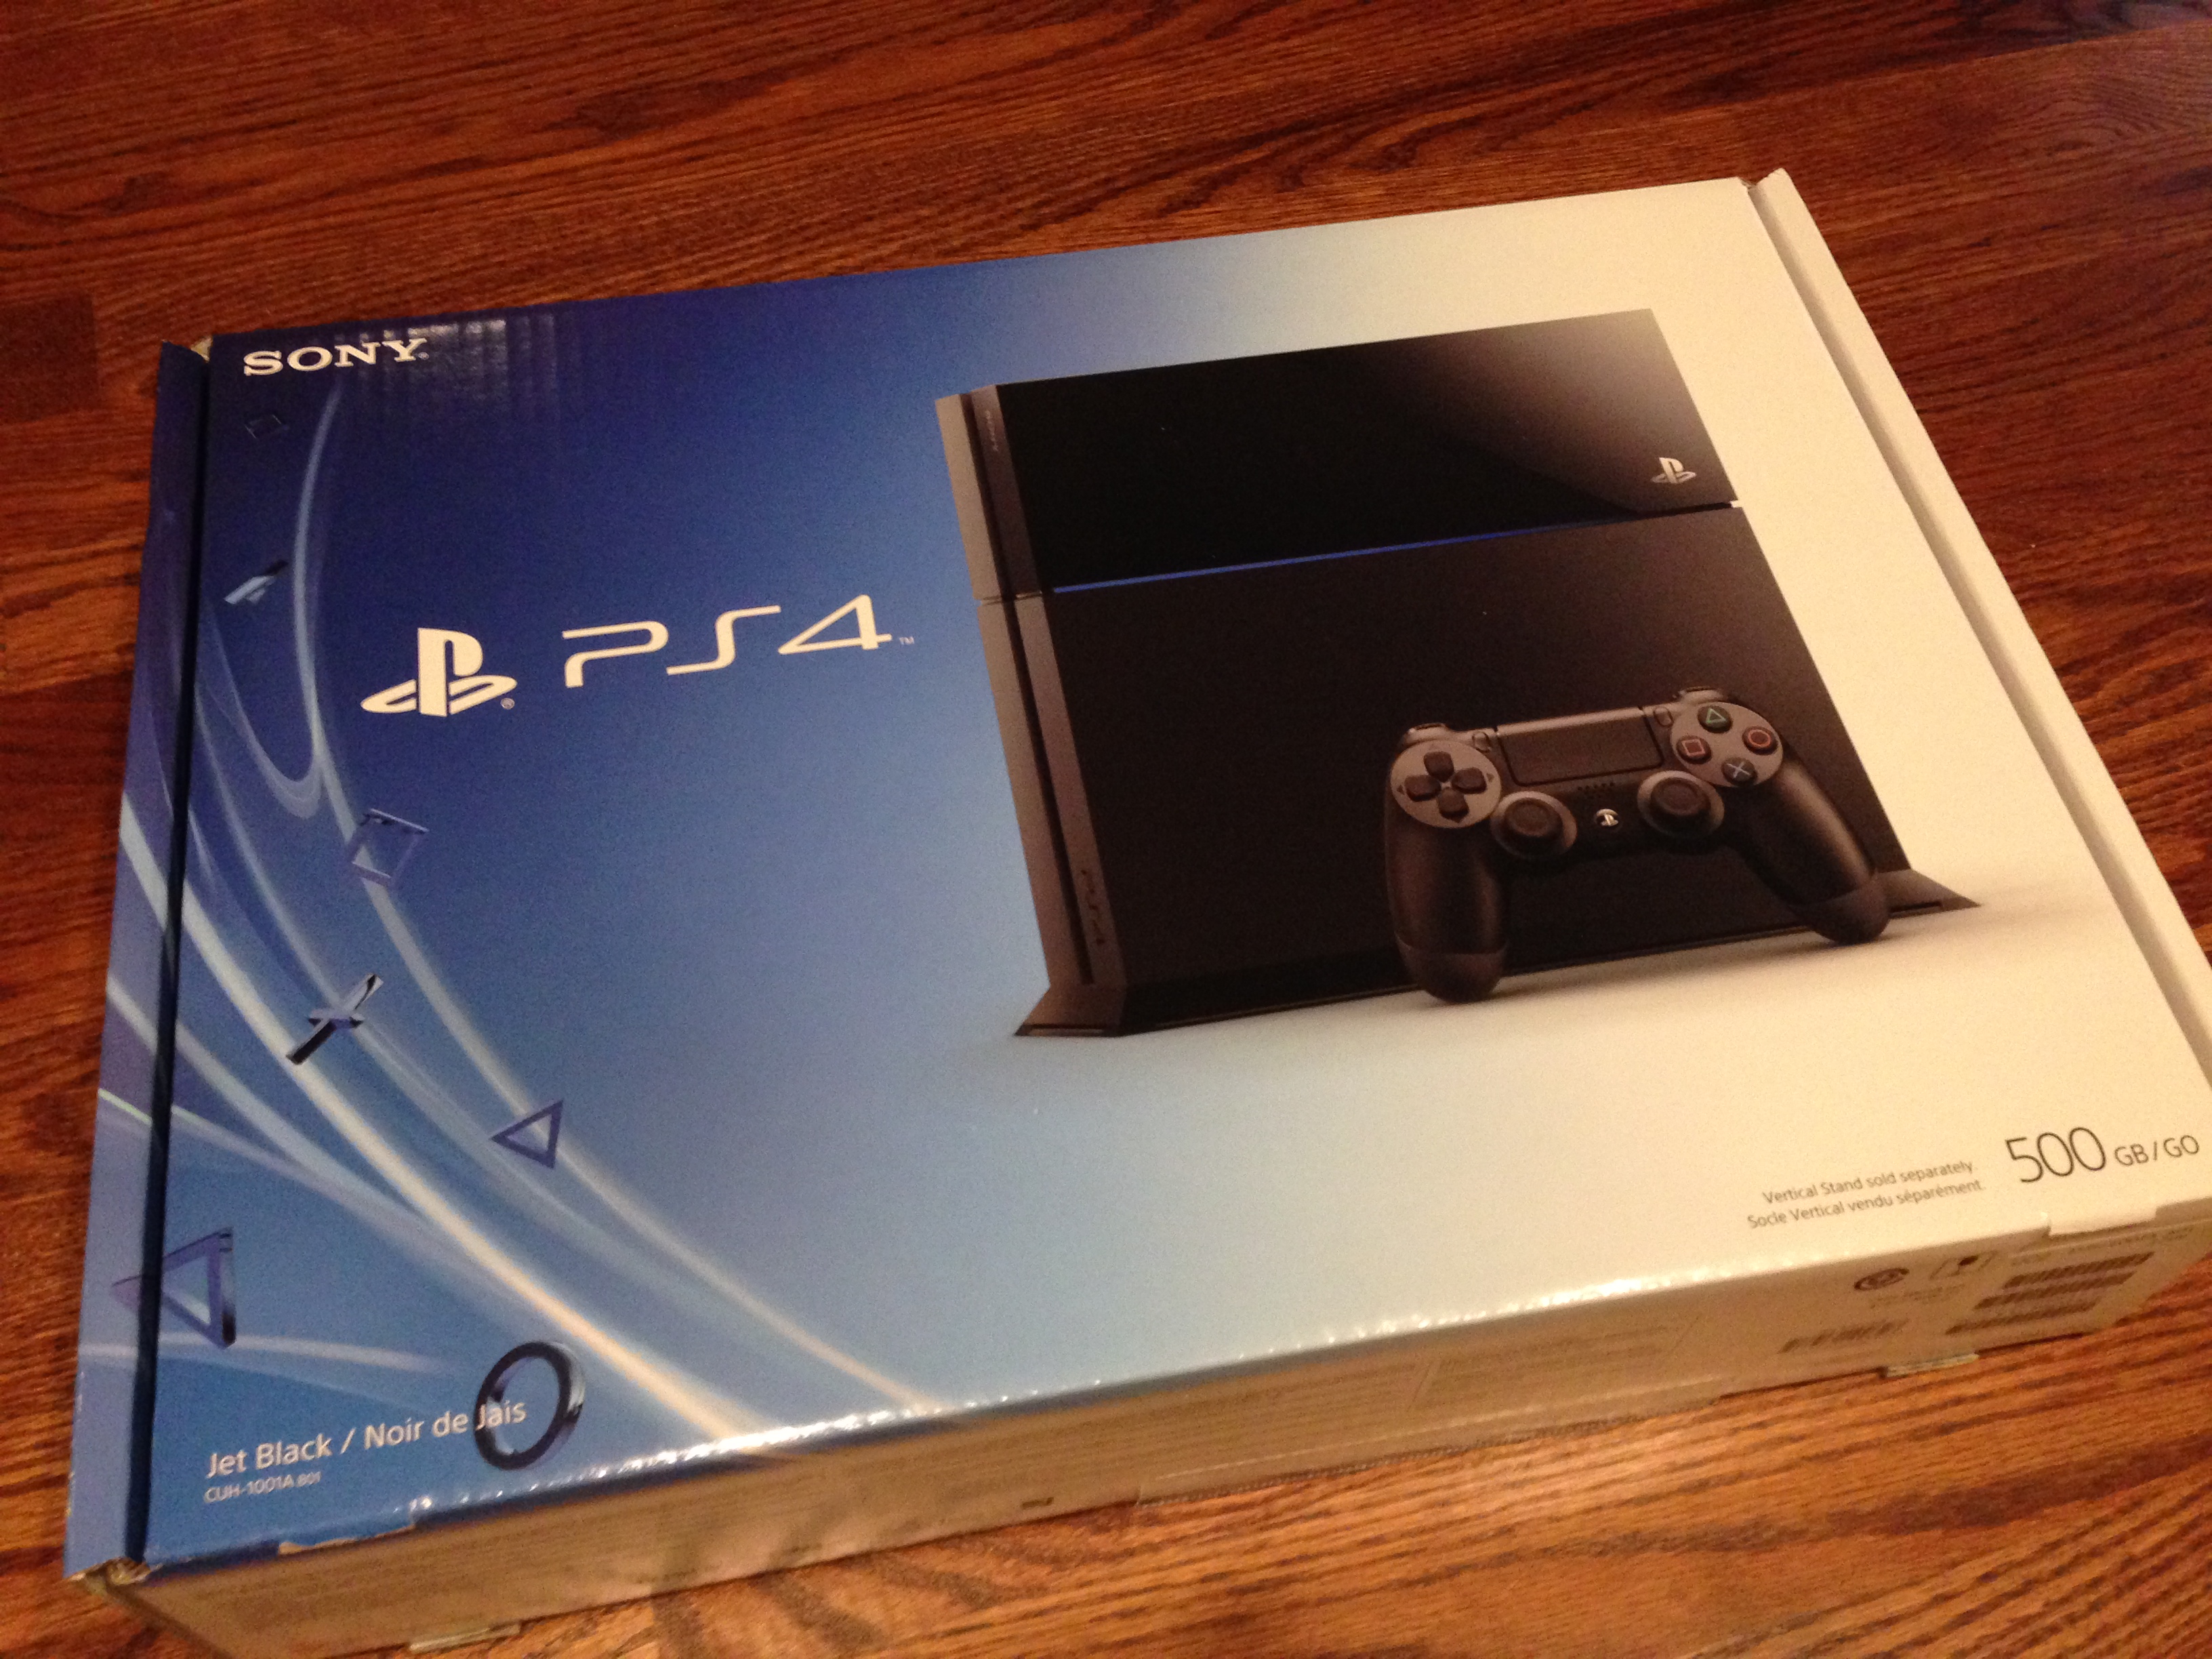 We unbox the PS4 and it's beautiful. 